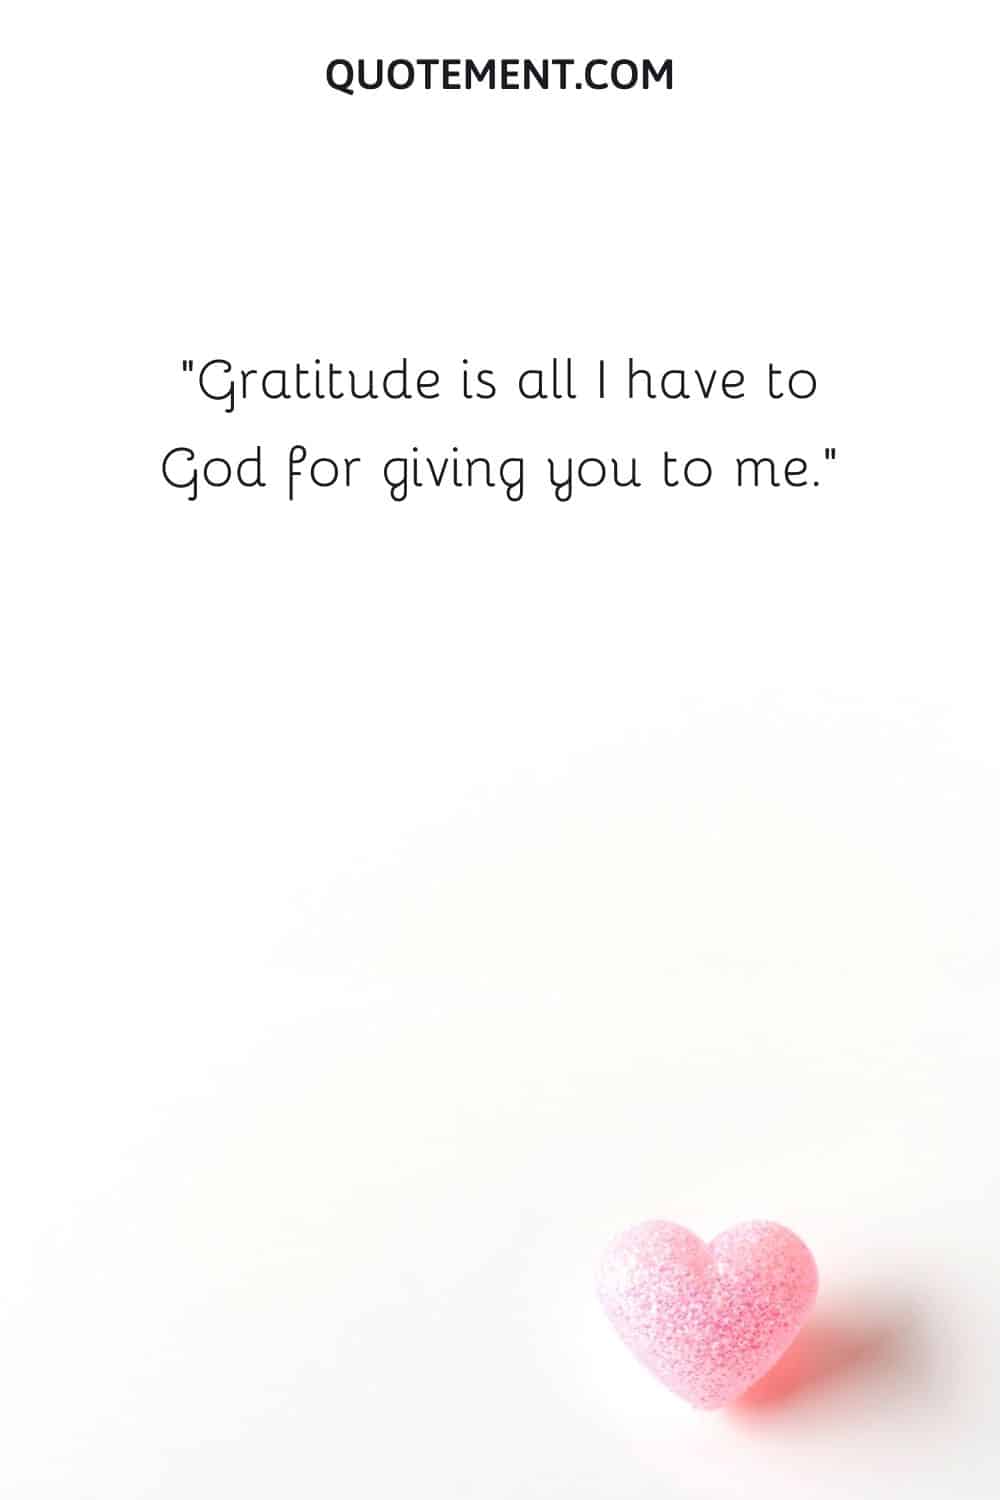 Gratitude is all I have to God for giving you to me.